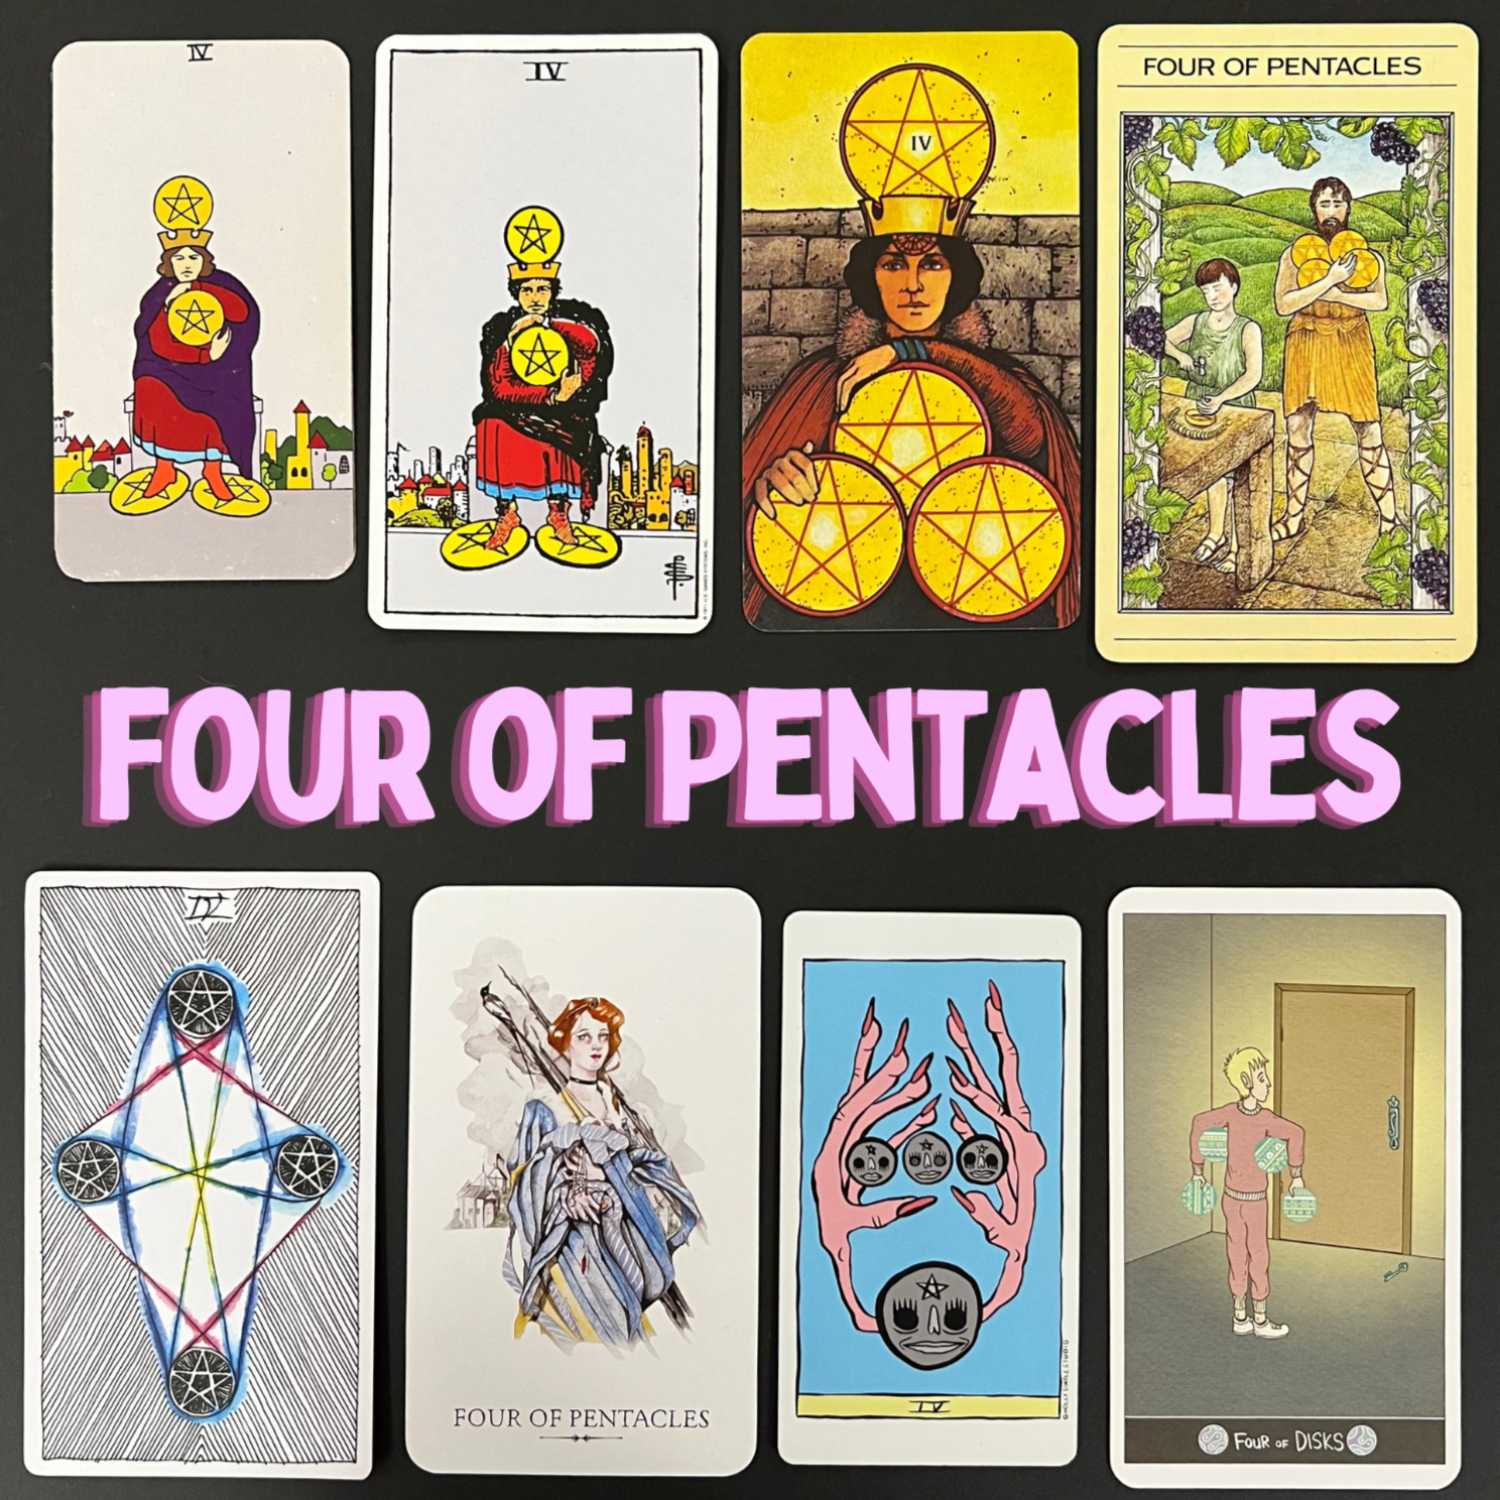 Ep11: Four of Pentacles